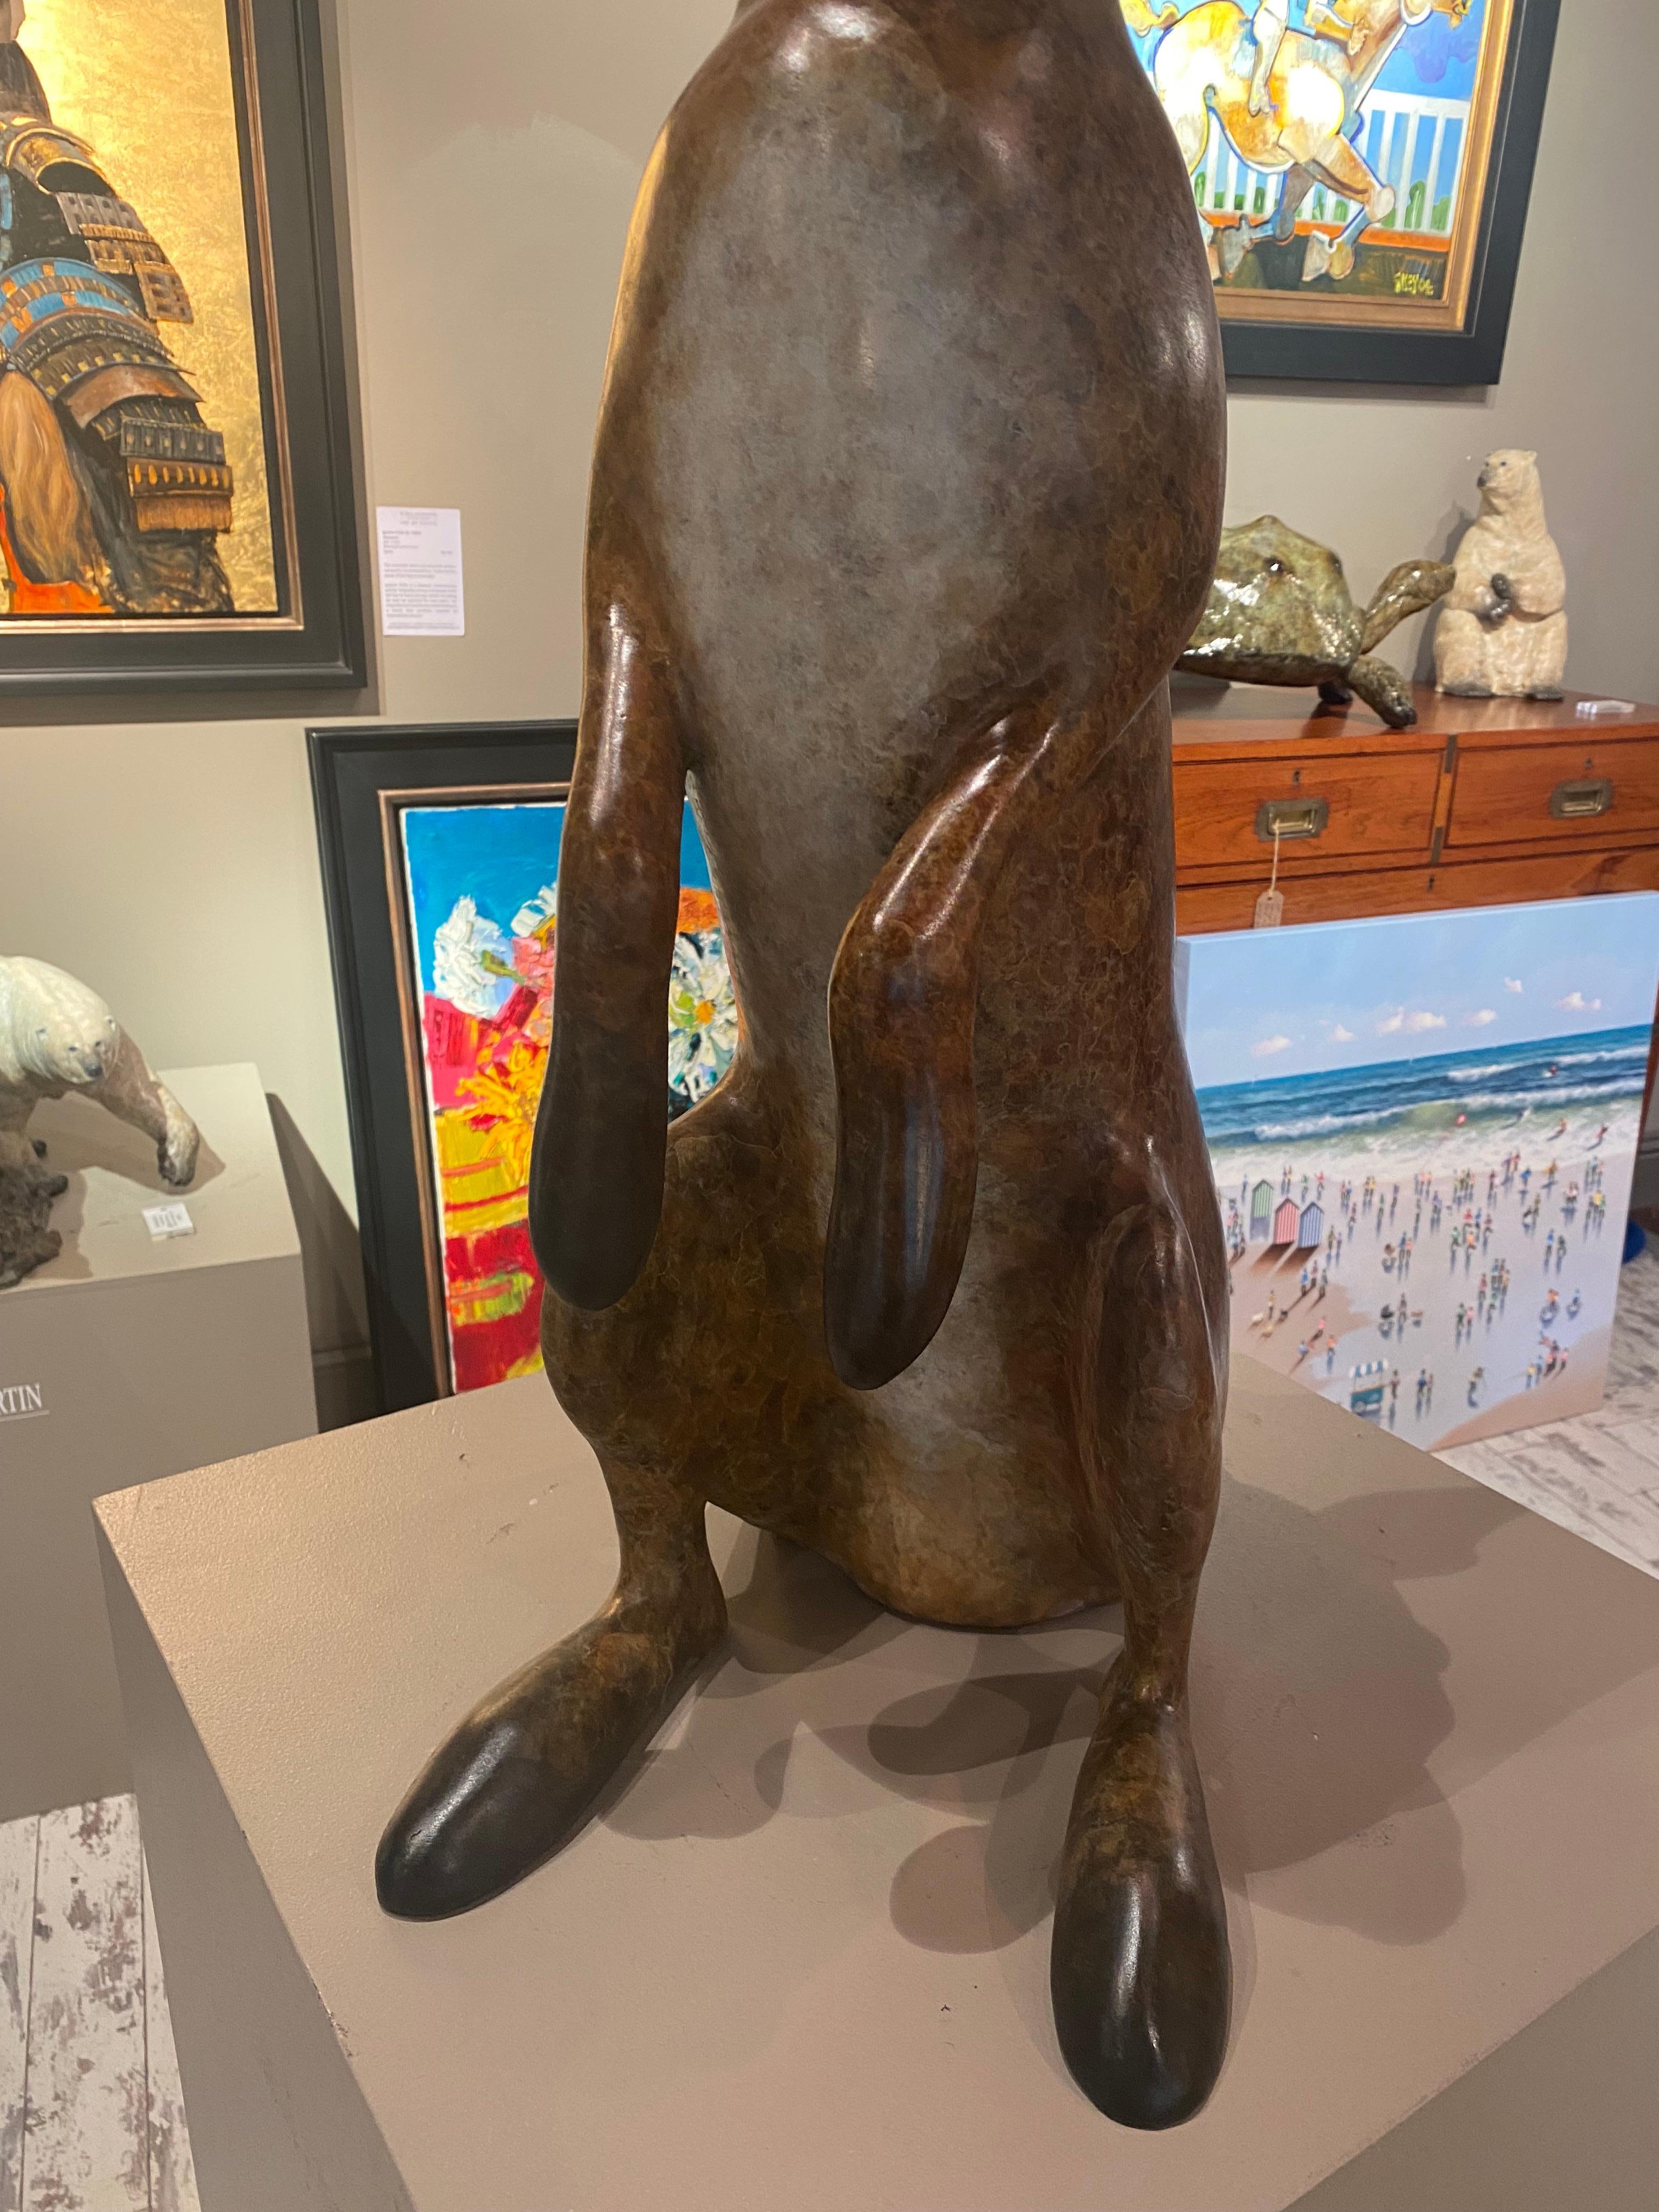 'Alert Hare' Contemporary Bronze Sculpture of a Hare, patina brown, white - Gold Still-Life Sculpture by Richard Smith b.1955